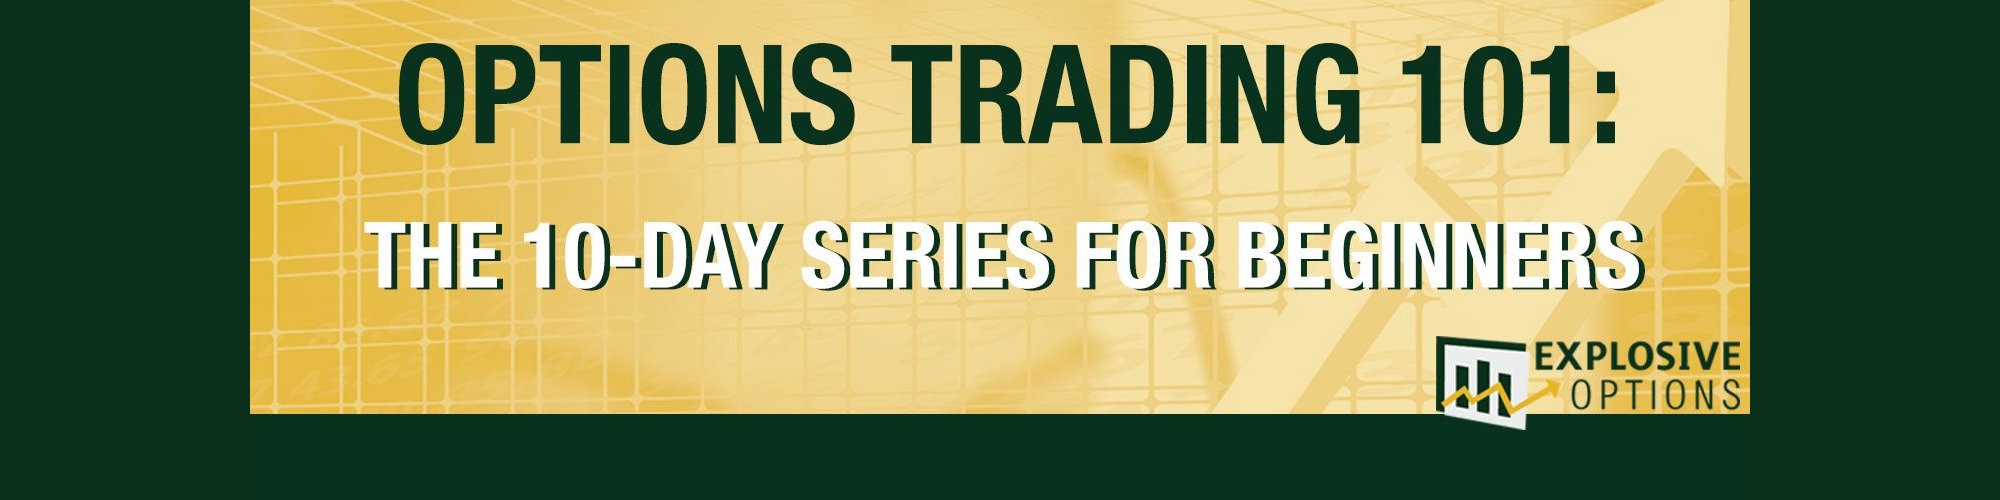 OPTIONS TRADING 101: THE 10-DAY SERIES FOR BEGINNERS